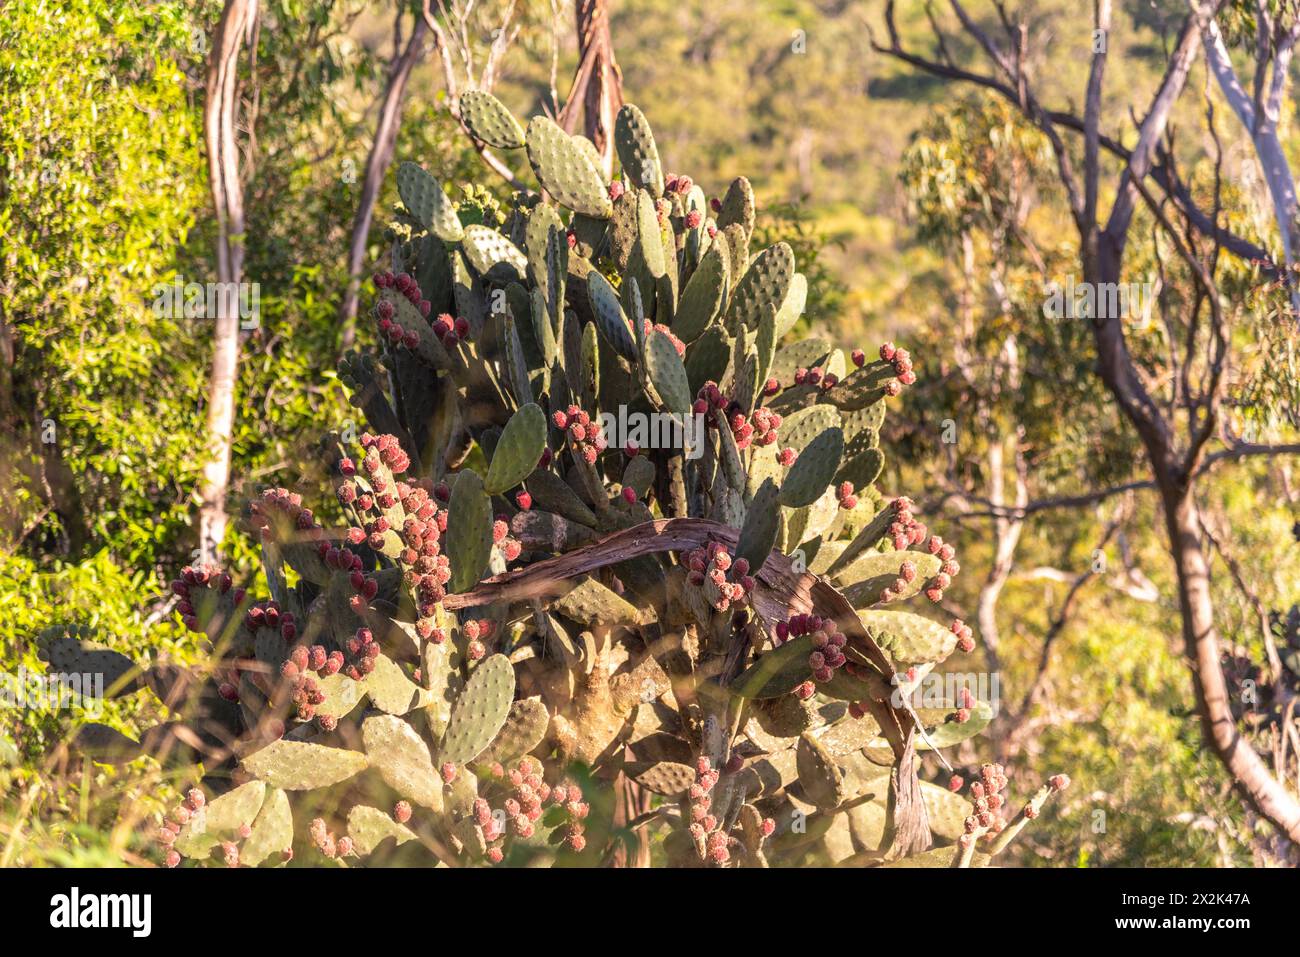 Wild cactus seen in Queensland, Australia with pink, red flowers blooming. Blurred green, bush, wild background. Stock Photo